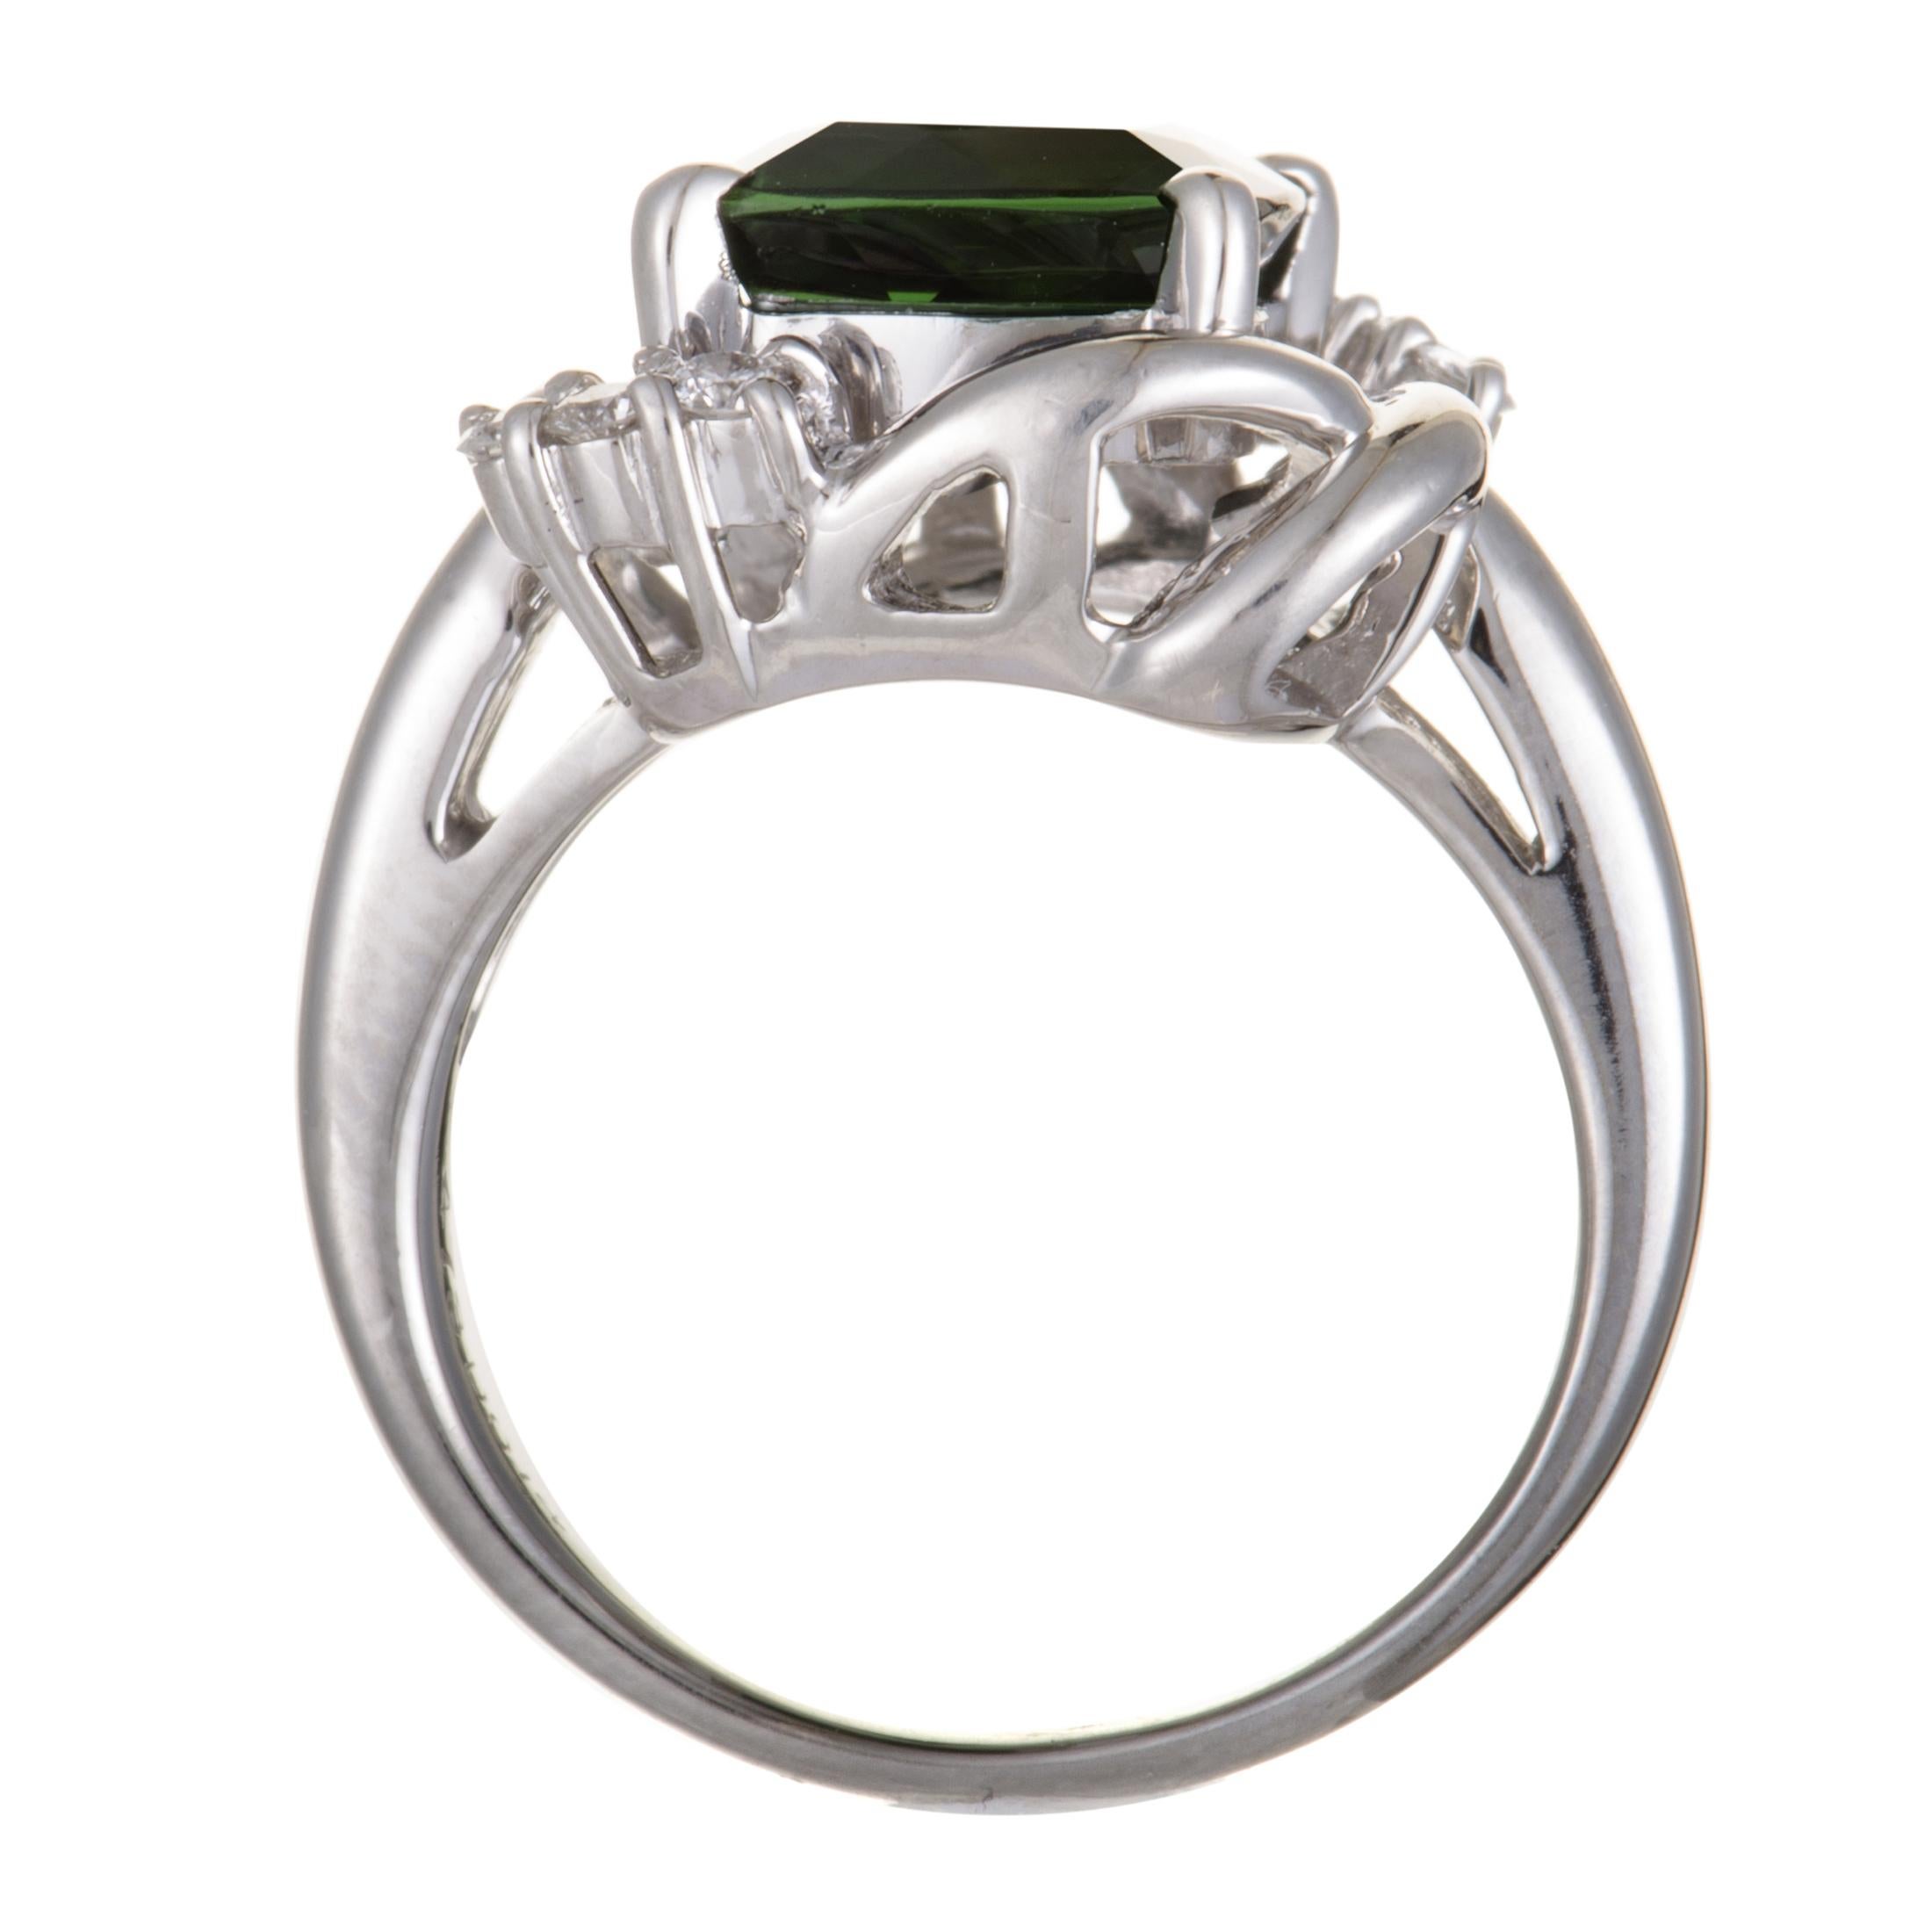 This aesthetically pleasing and extraordinarily designed ring epitomizes elegance, grace and sheer beauty. Exquisitely crafted in classy platinum, the stunning ring is adorned with 0.14ct of glamorous diamonds and a glamorous green tourmaline of